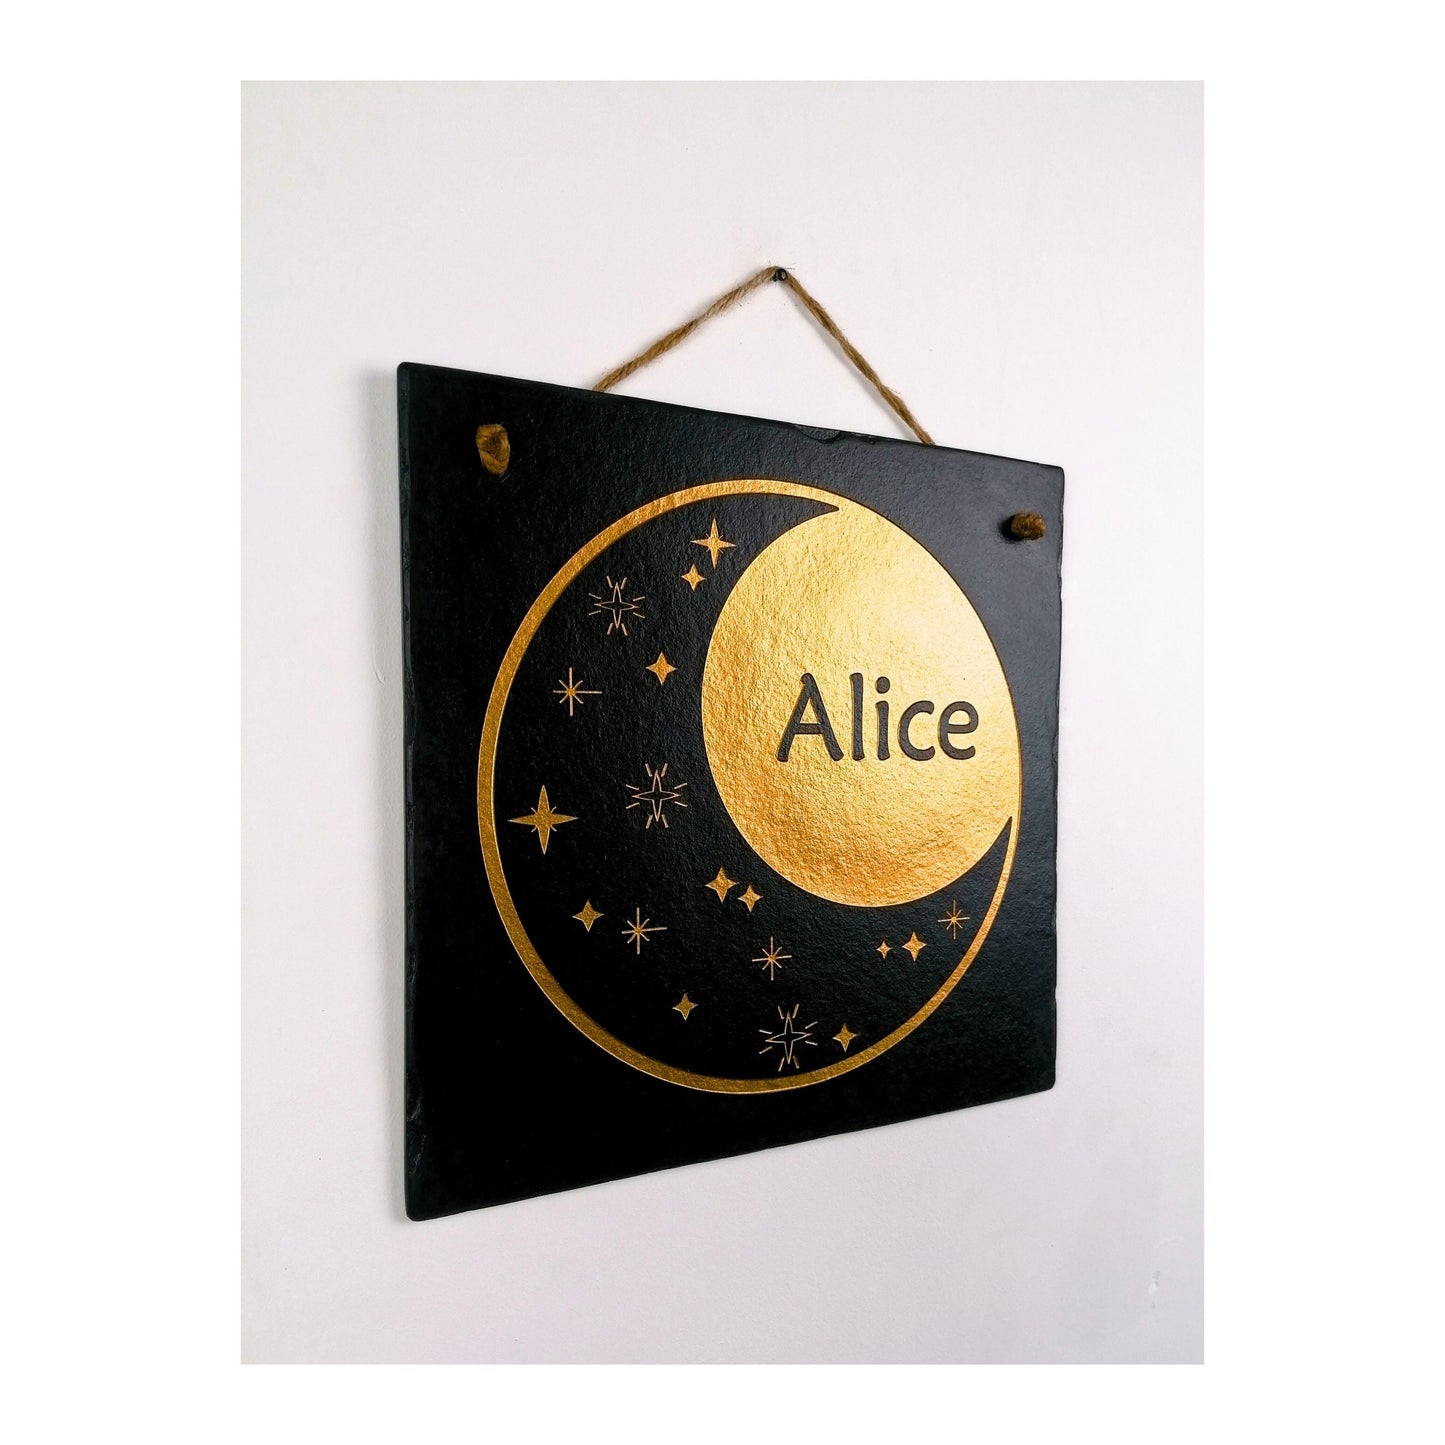 Bedroom Wall Hanging | Personalised Custom Art Drawing | Natural Slate Deep Engraved | Moon And Stars With Name | Rustic Unique Bespoke Gift